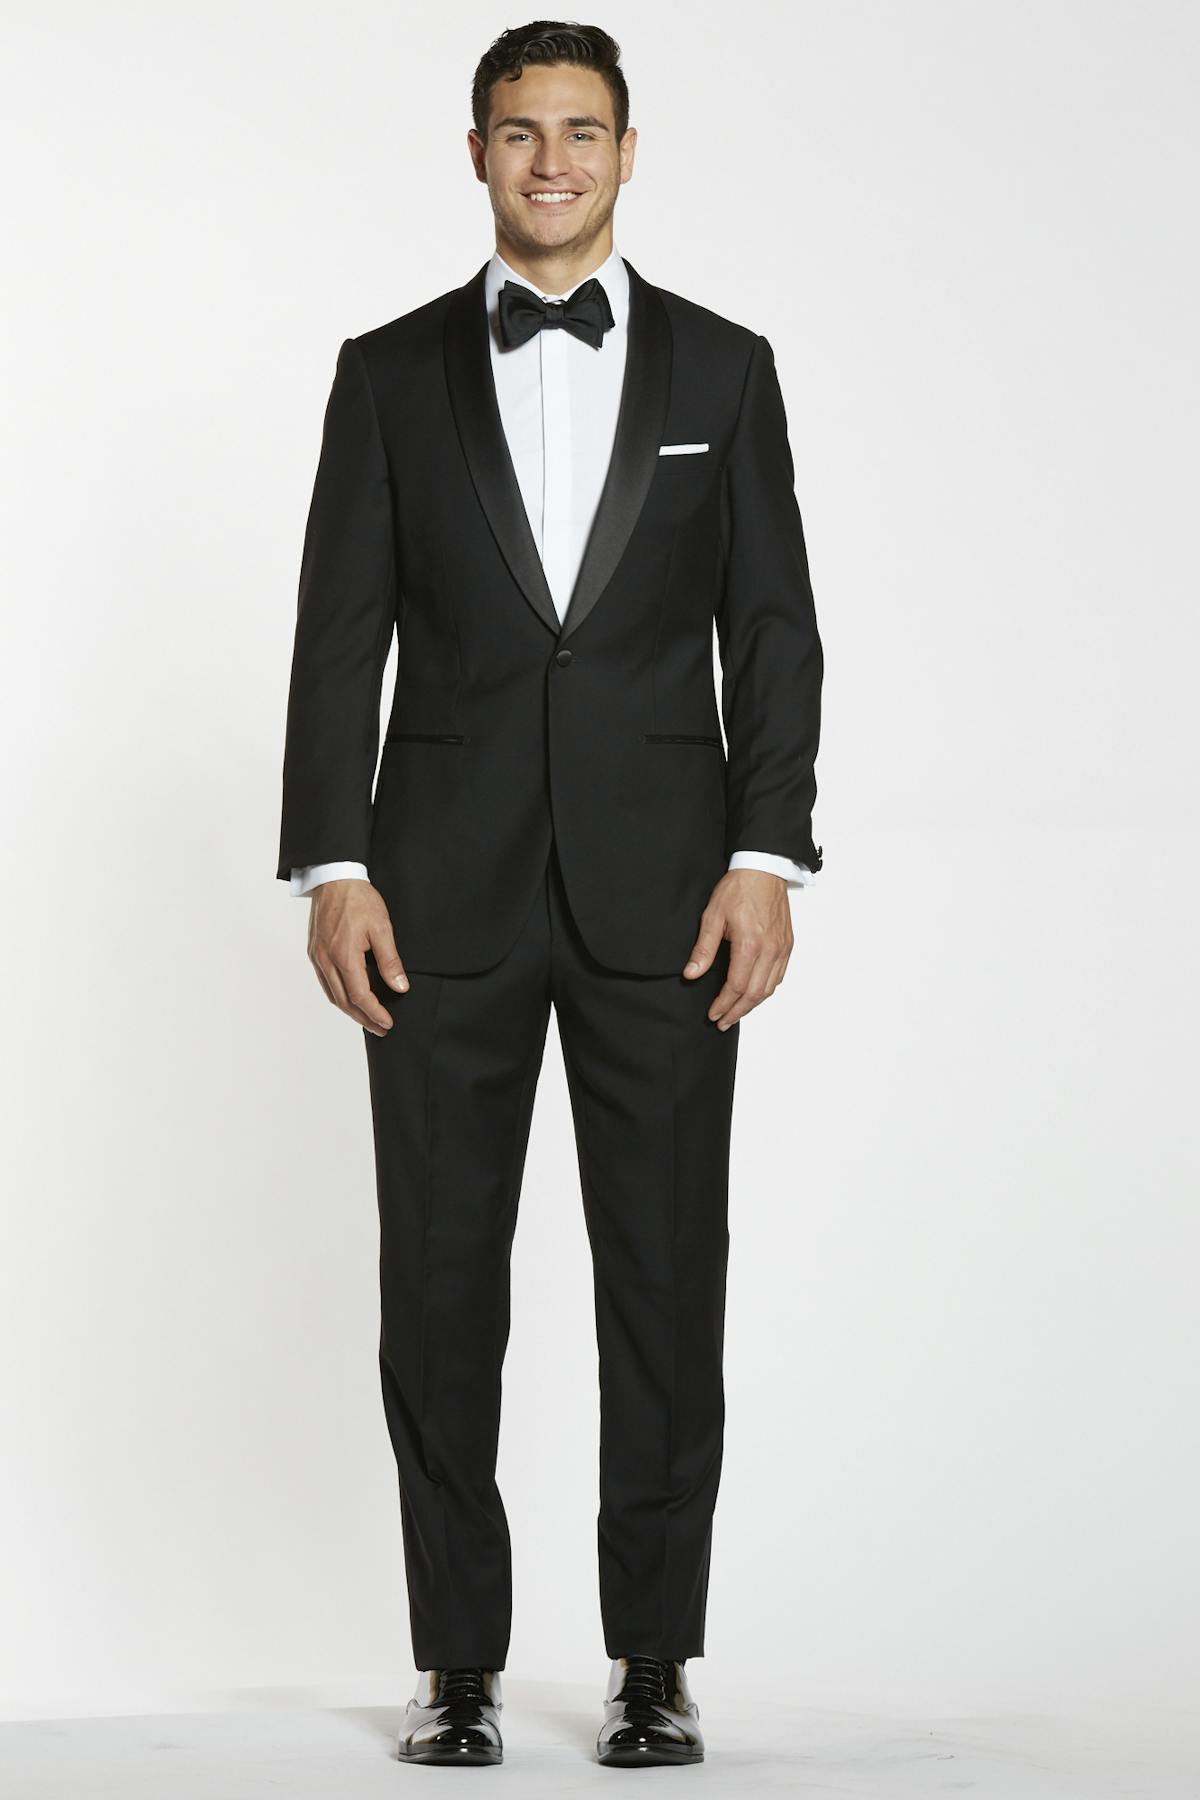  Best groomsman gift ideas and how to place cufflinks with your wedding tuxedo shirt.